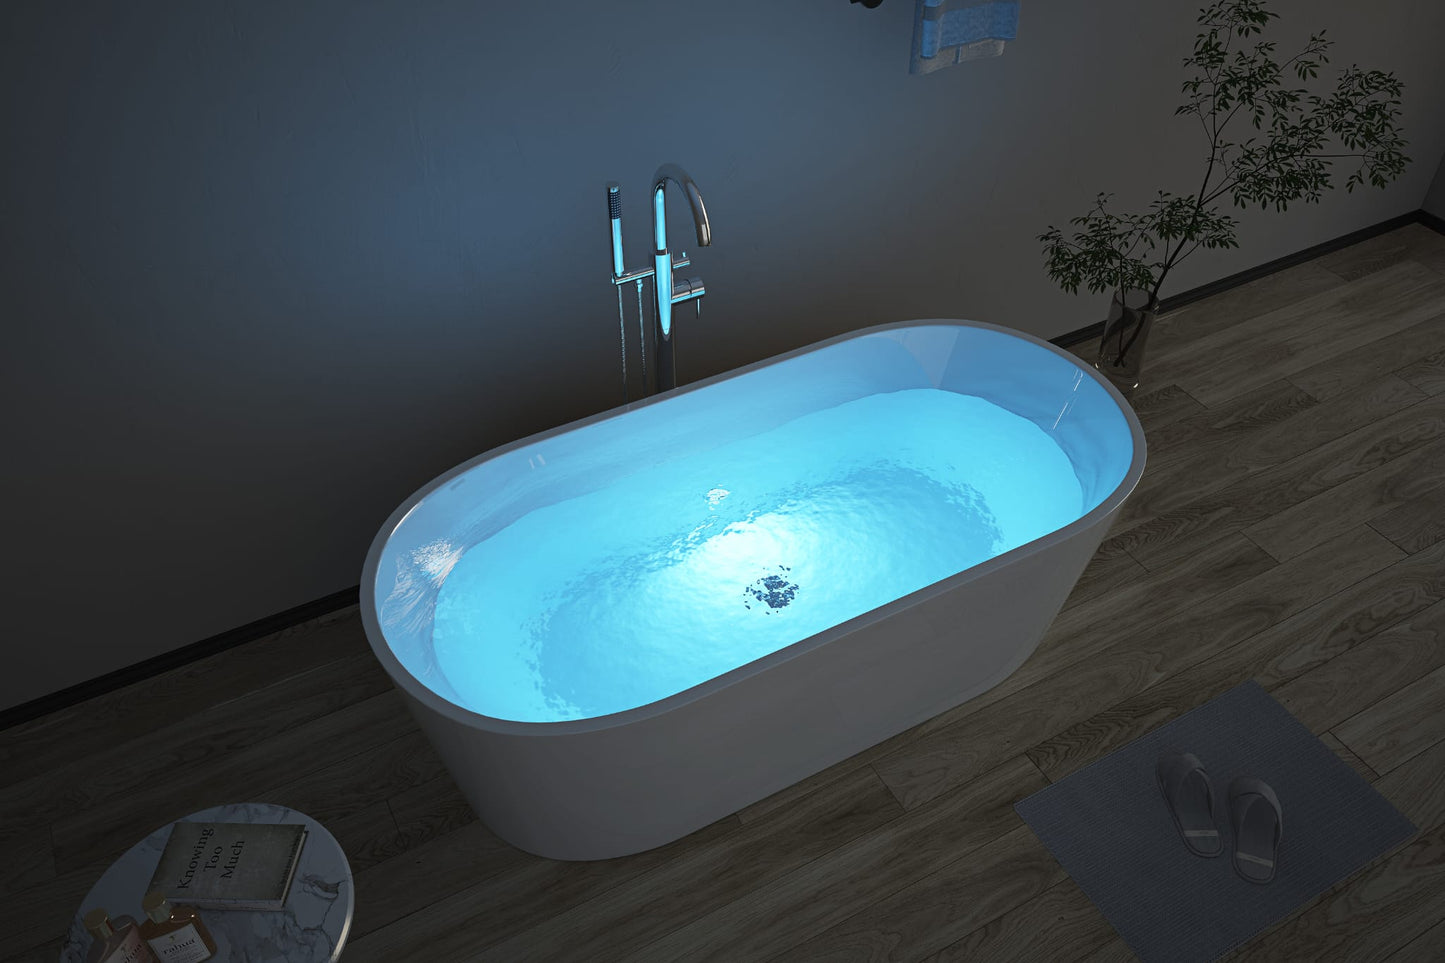 F&D 1201 Free Standing Acrylic Bath Tub 67" And 60" Inches